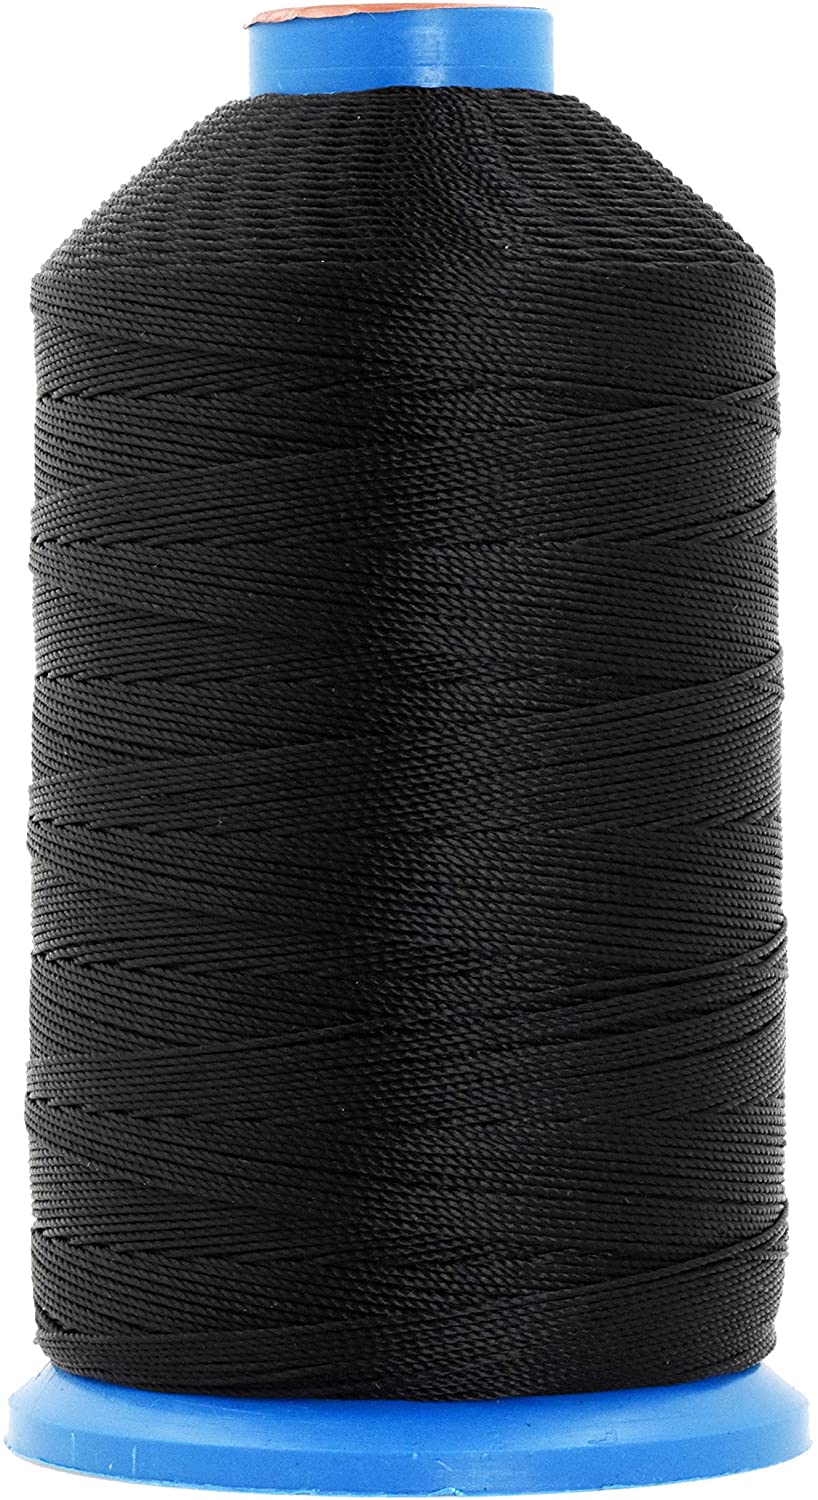 Mandala Crafts Bonded Nylon Thread for Sewing Leather, Upholstery, Jeans and Weaving Hair; Heavy-Duty (T90 #92 280D/3, Black)